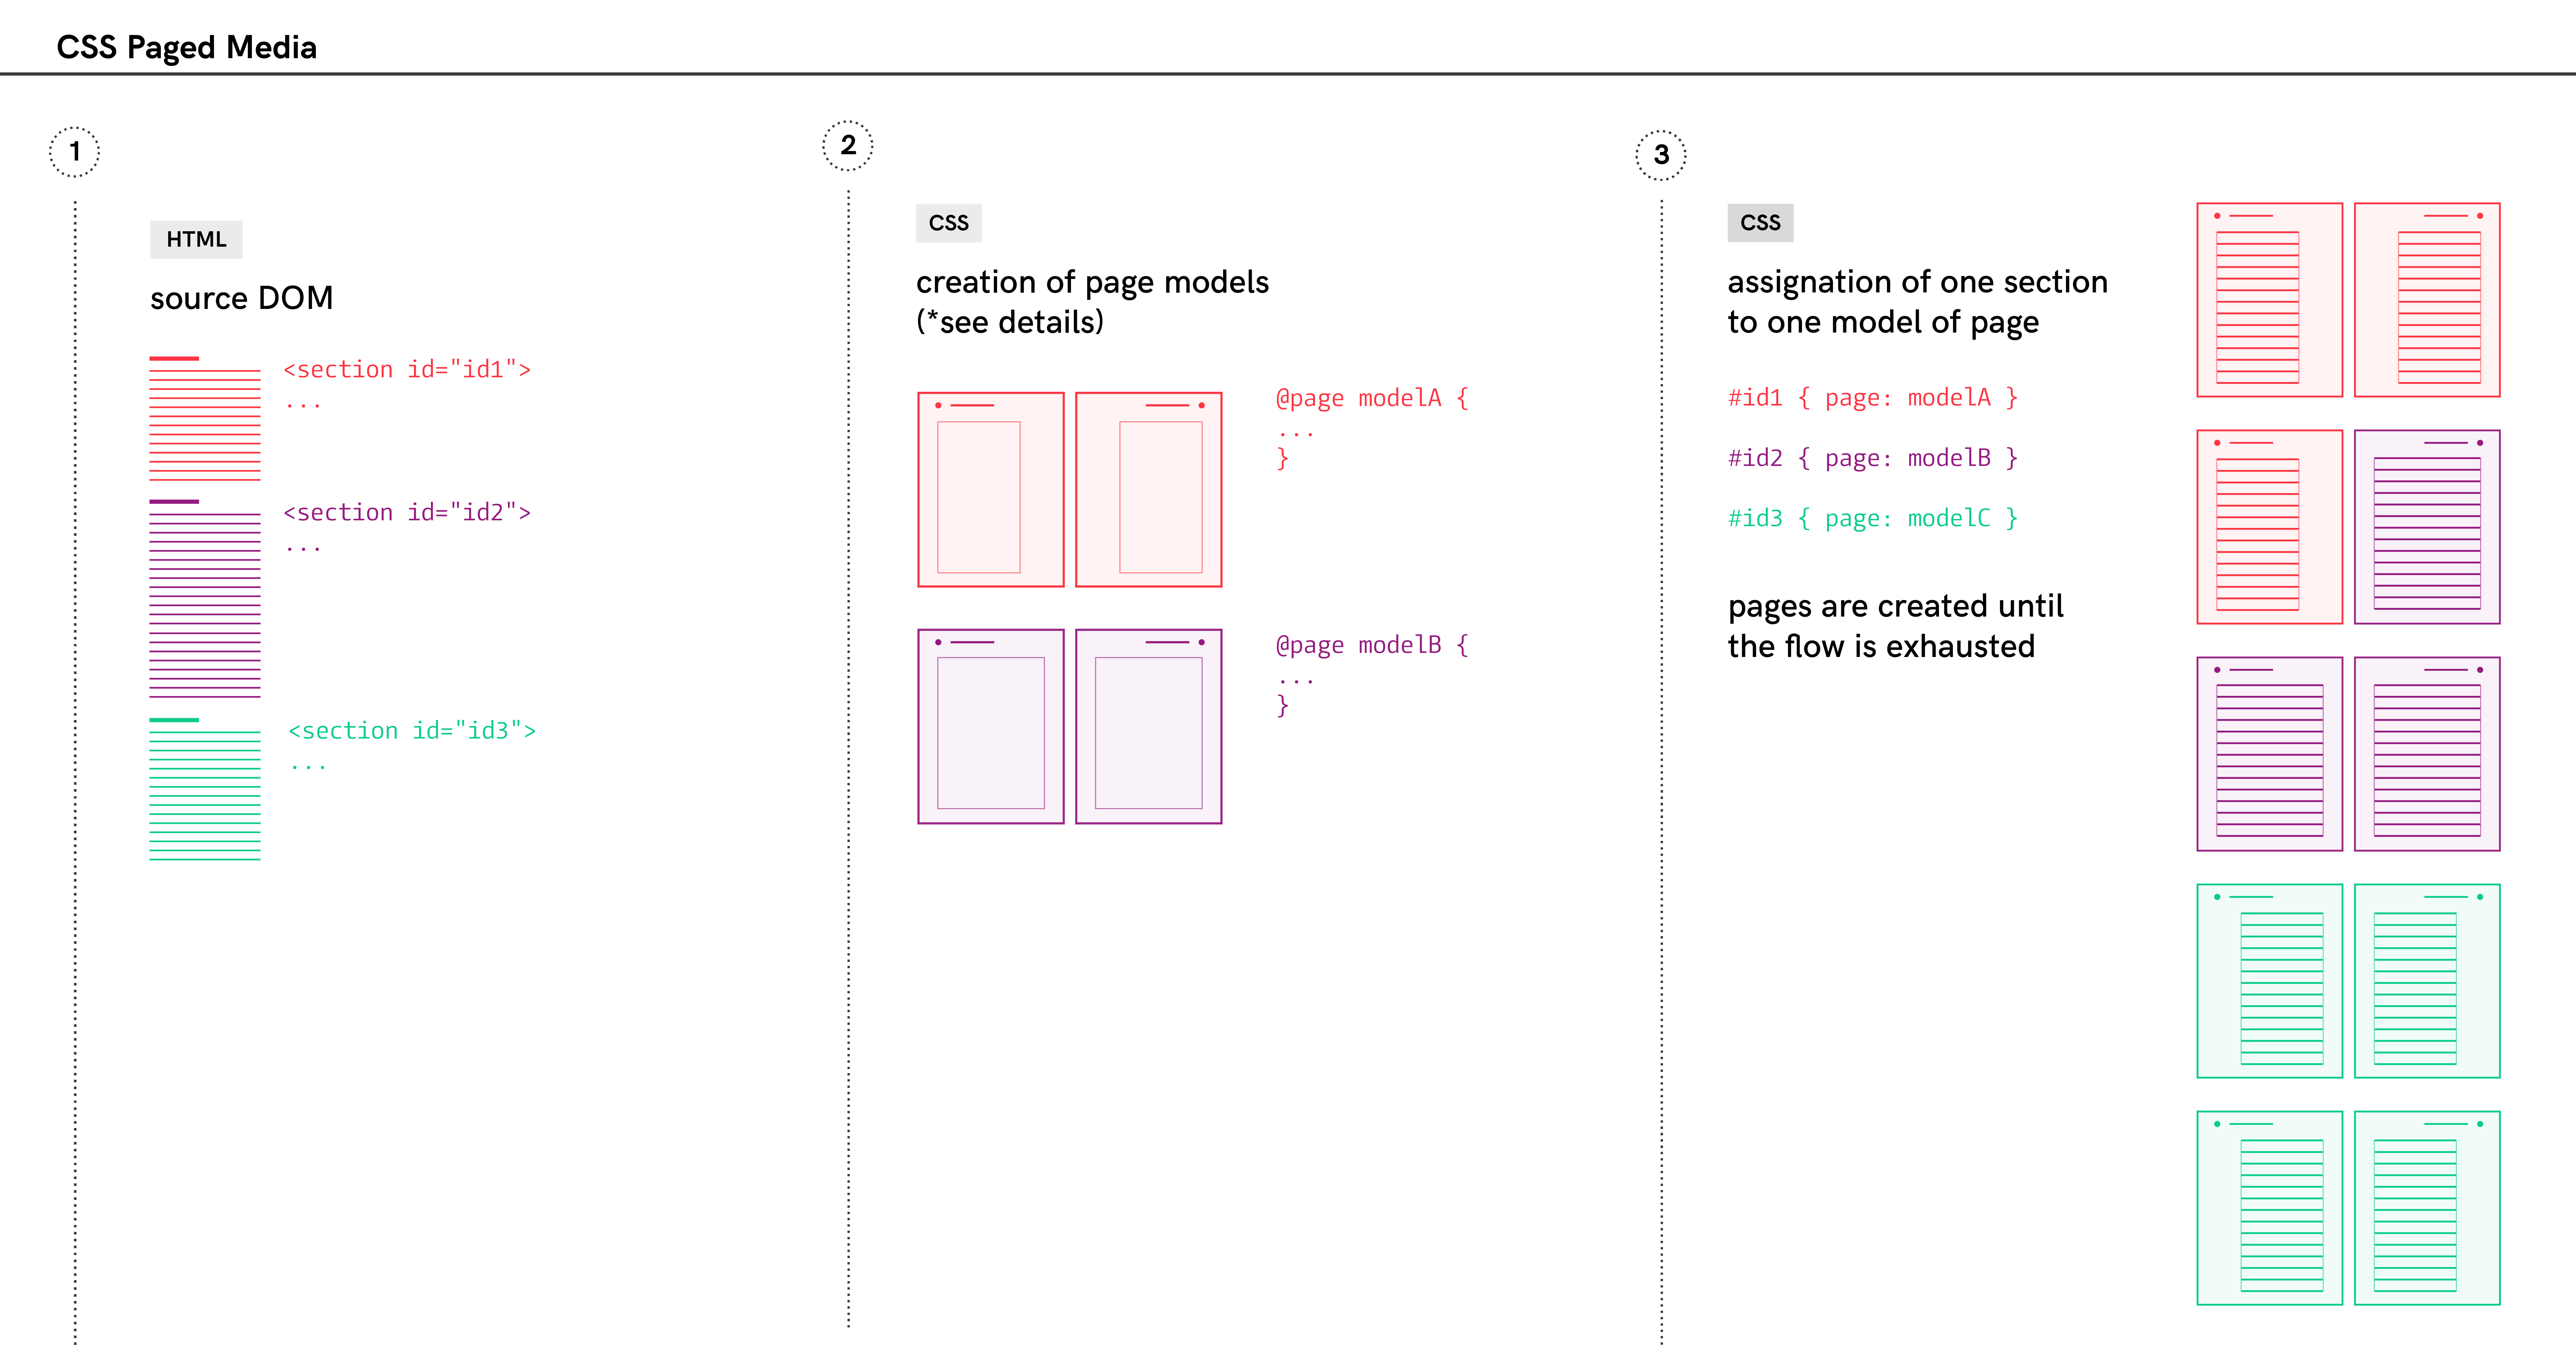 Sketch about CSS Paged Media specifications